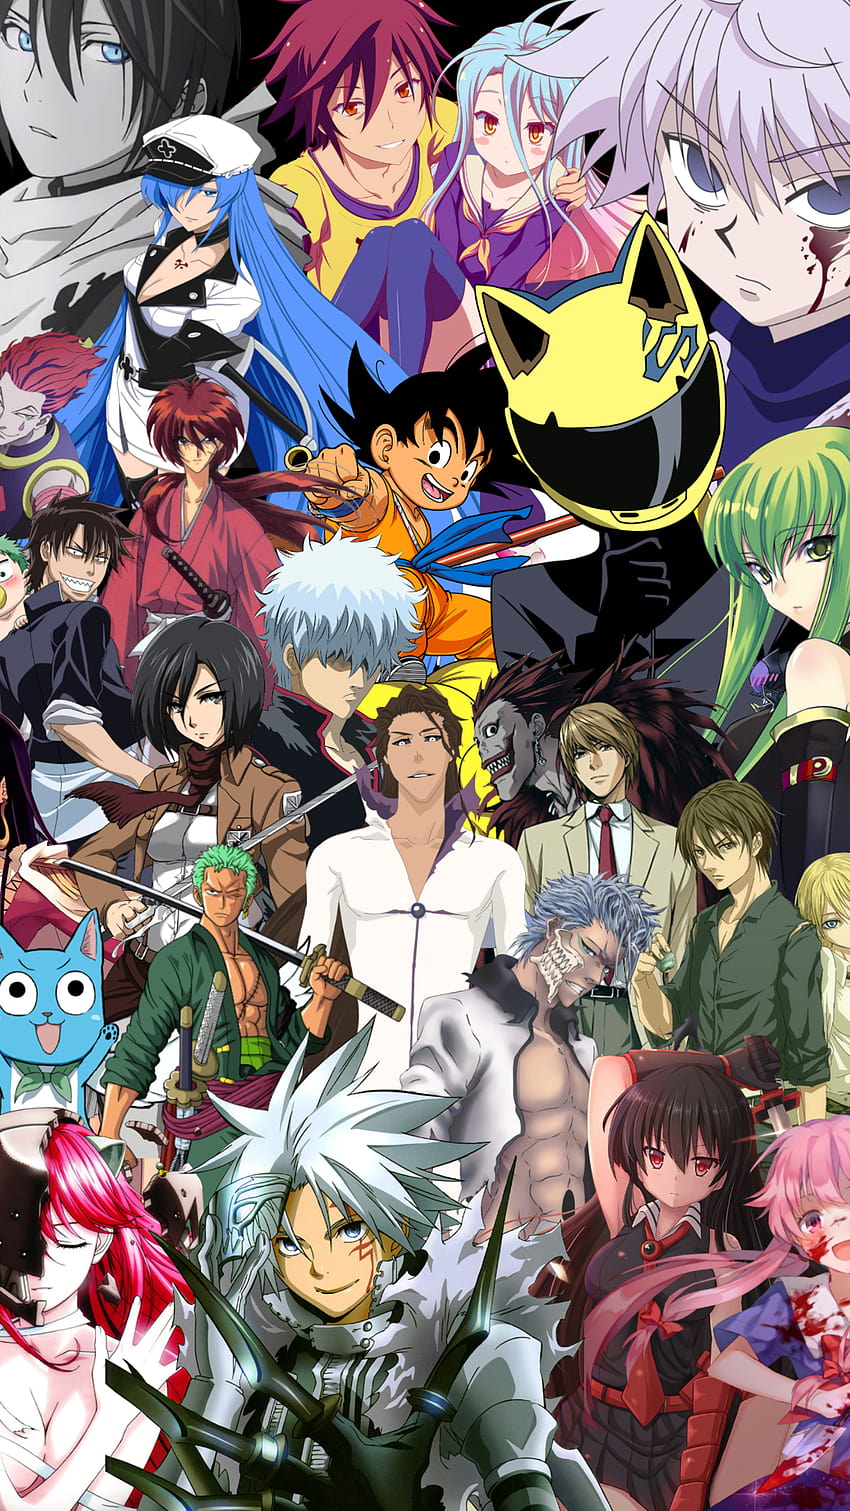 1000 Anime Crossover HD Wallpapers and Backgrounds